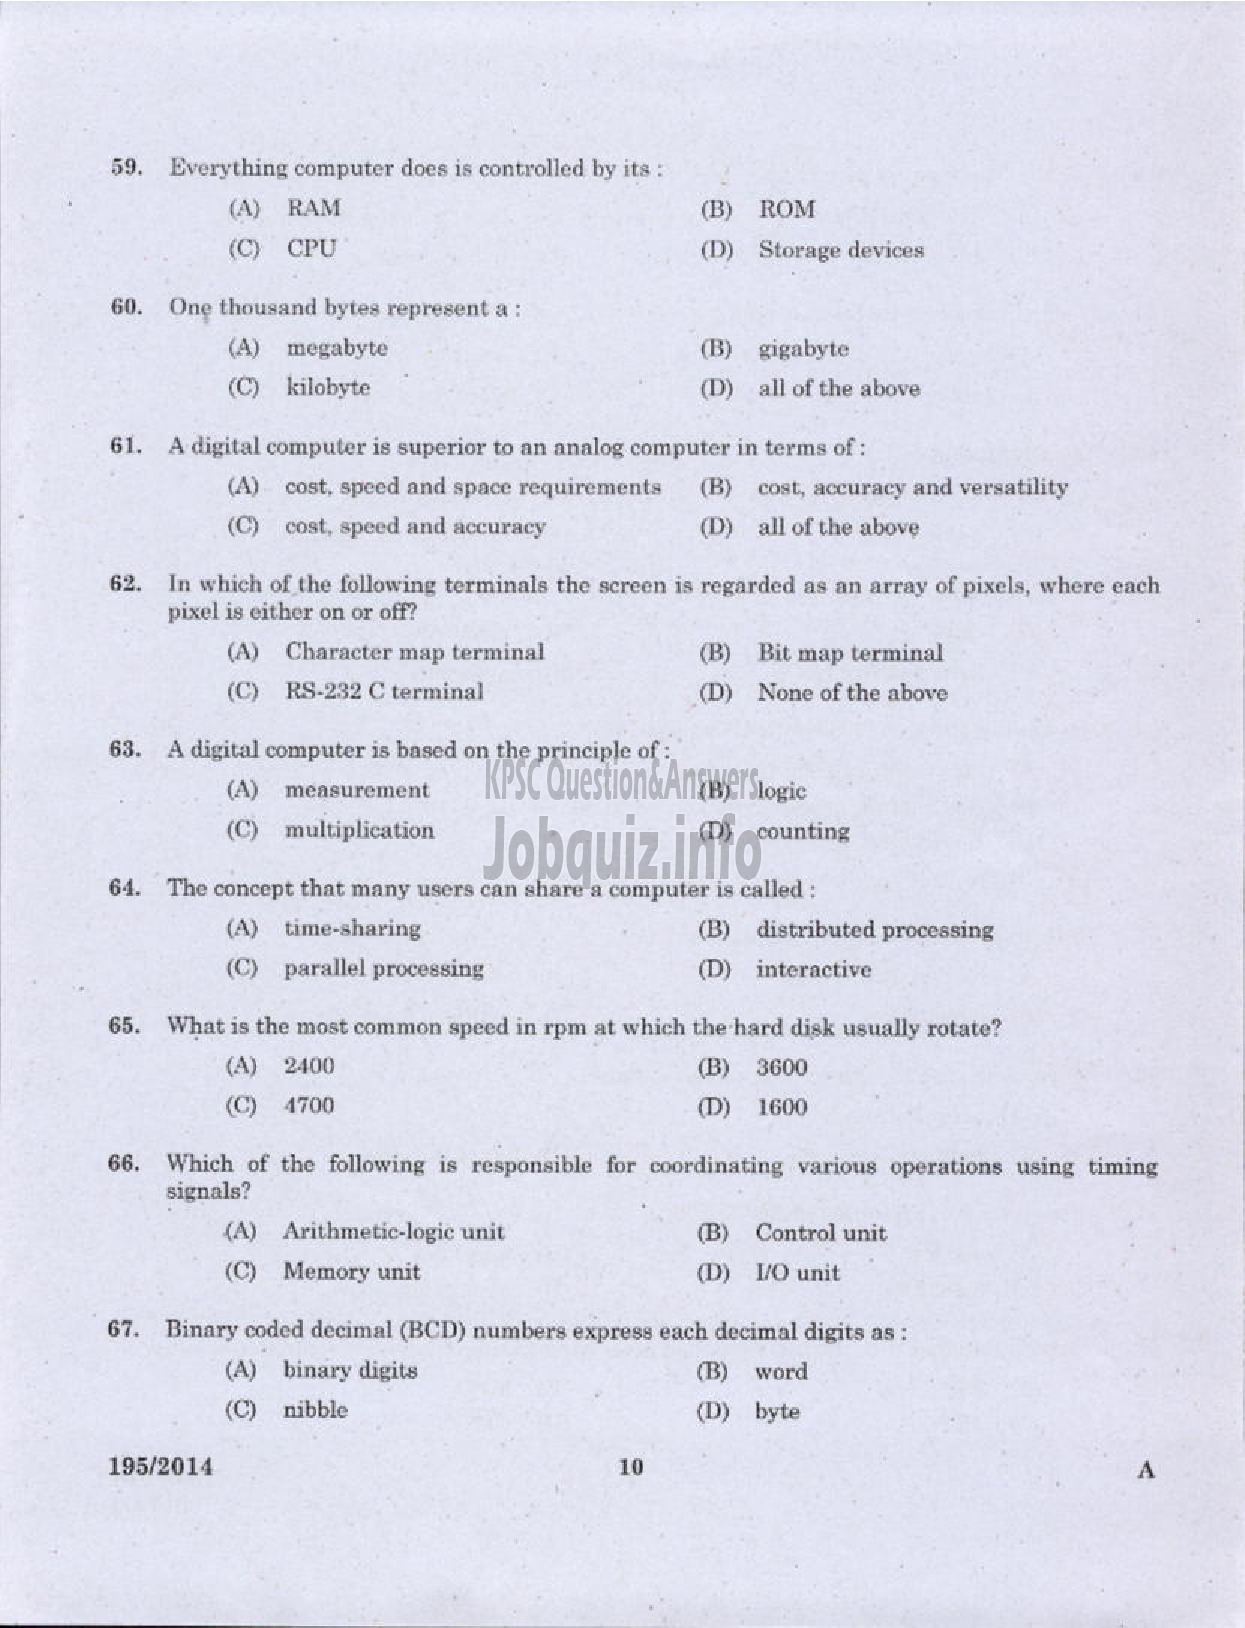 Kerala PSC Question Paper - COMPUTER PROGRAMMER CUM OPERATOR KERALA STATE BEVERAGES / MANUFACTURING AND MARKETING CORPORATION LTD-8